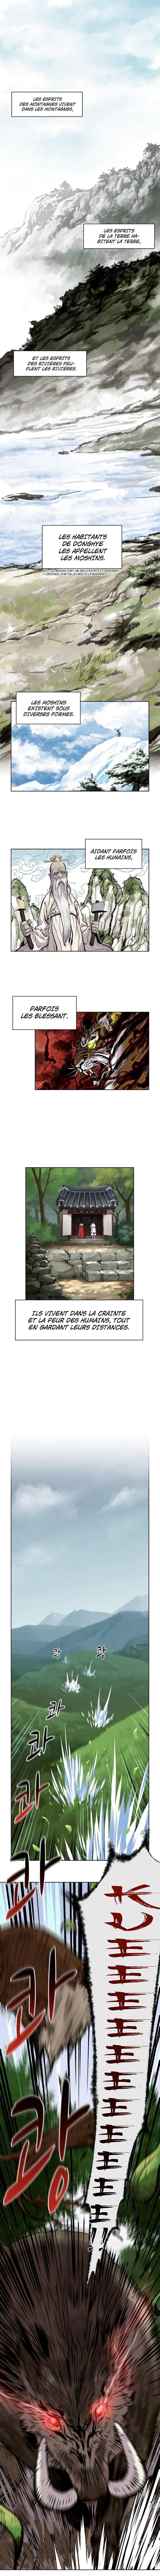 Chasseur De Moshin: Chapter 1 - Page 1